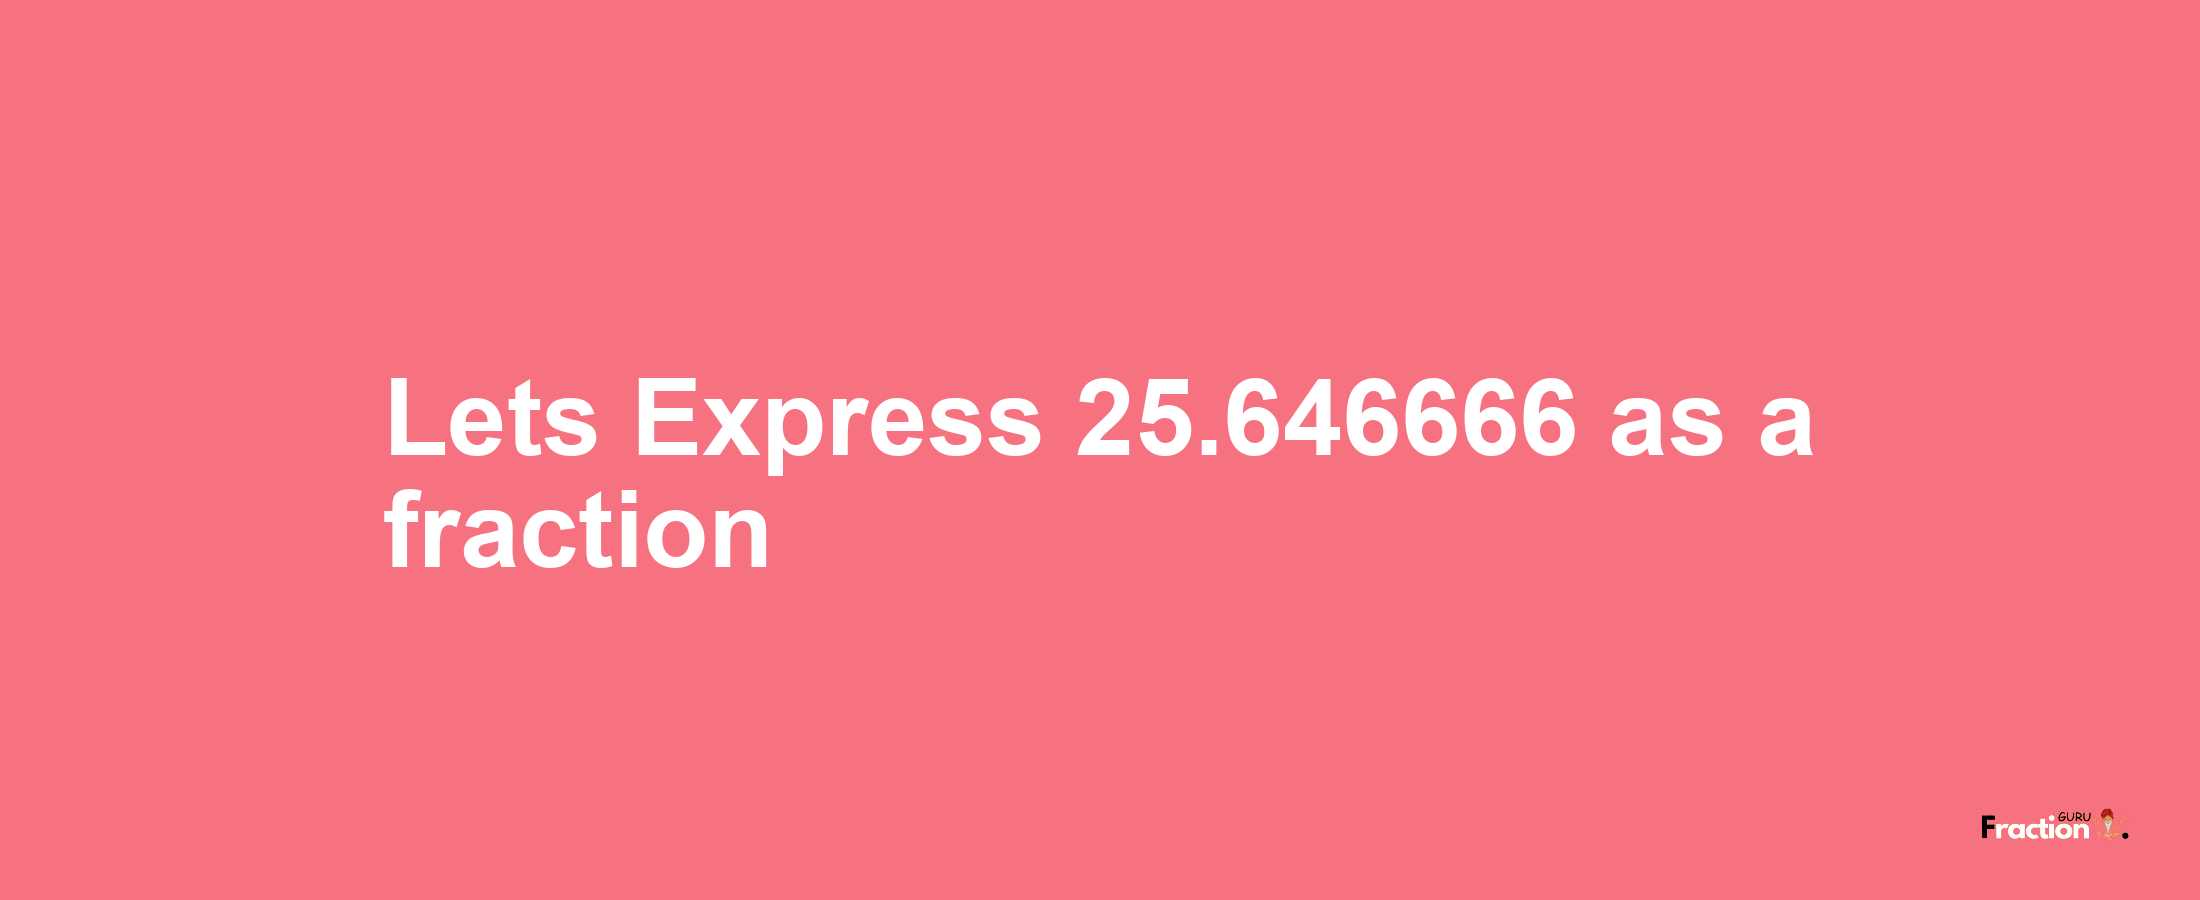 Lets Express 25.646666 as afraction